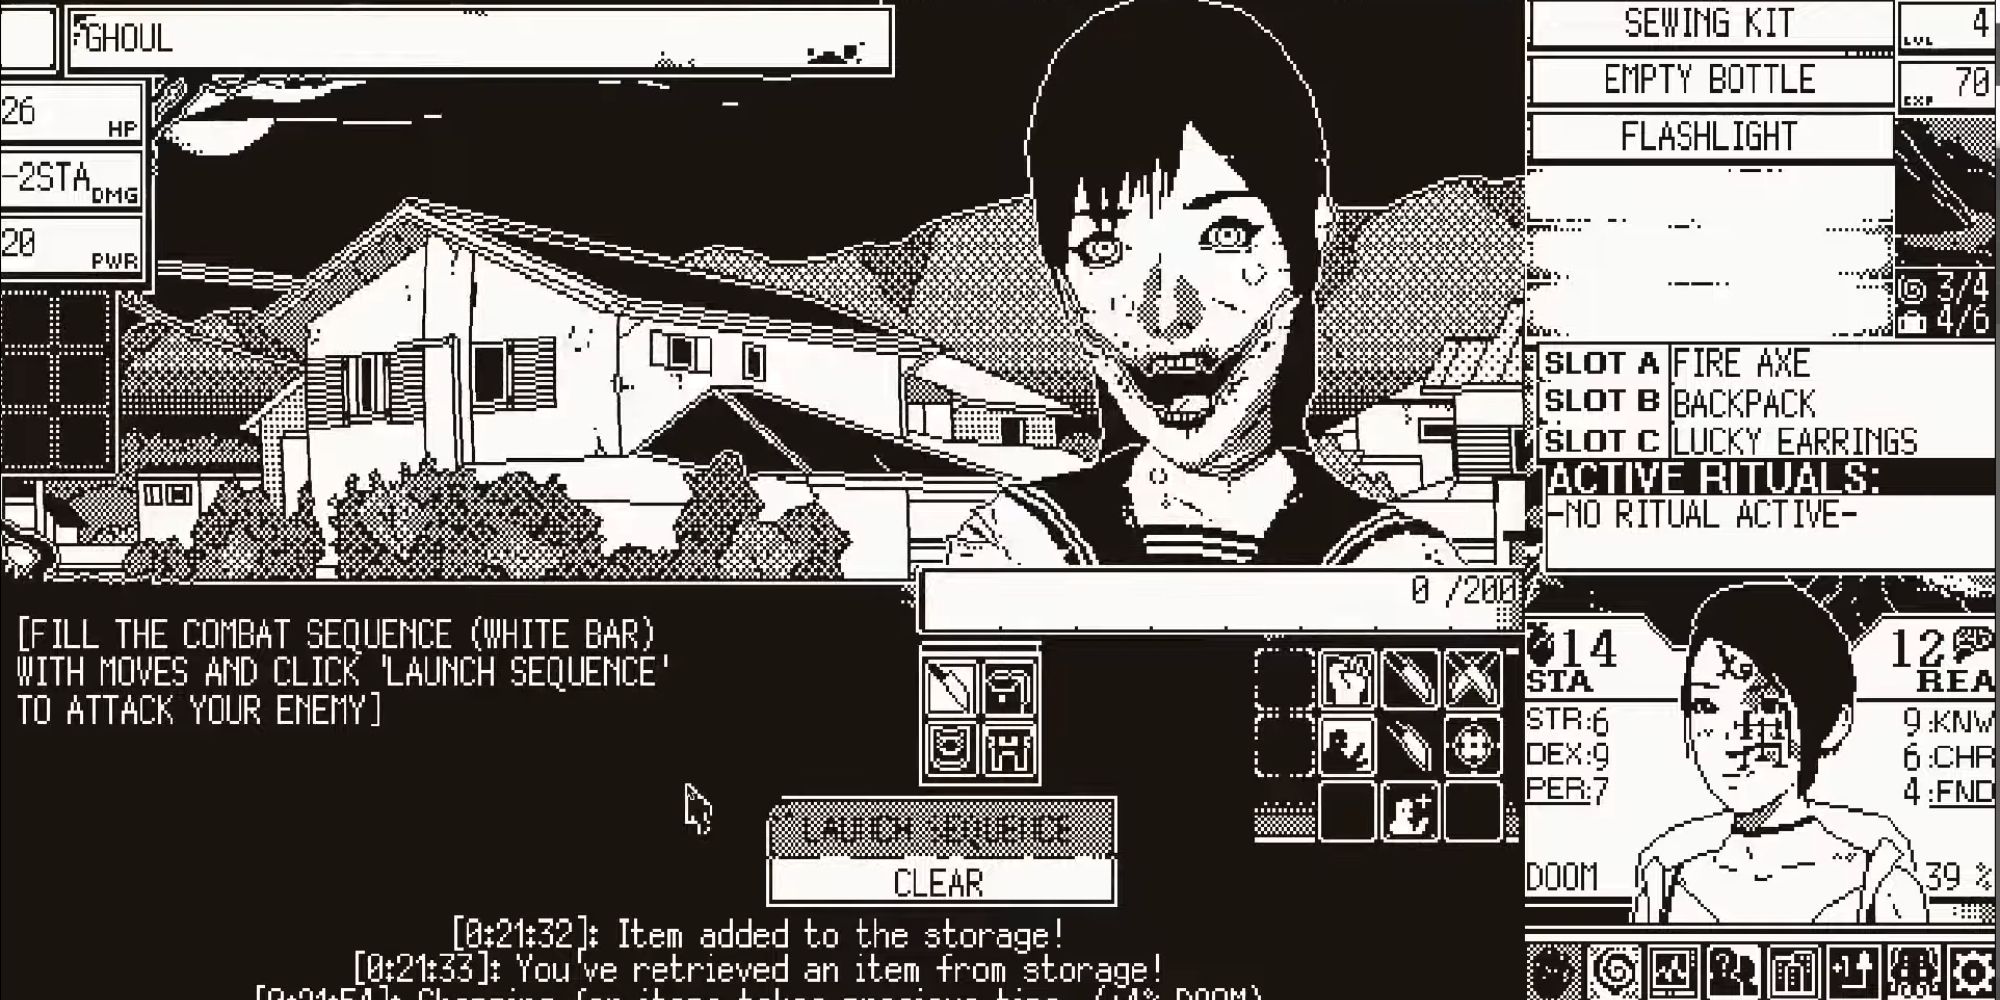 A screenshot from the upcoming game showing the art that truly reflects Junji Ito's horror